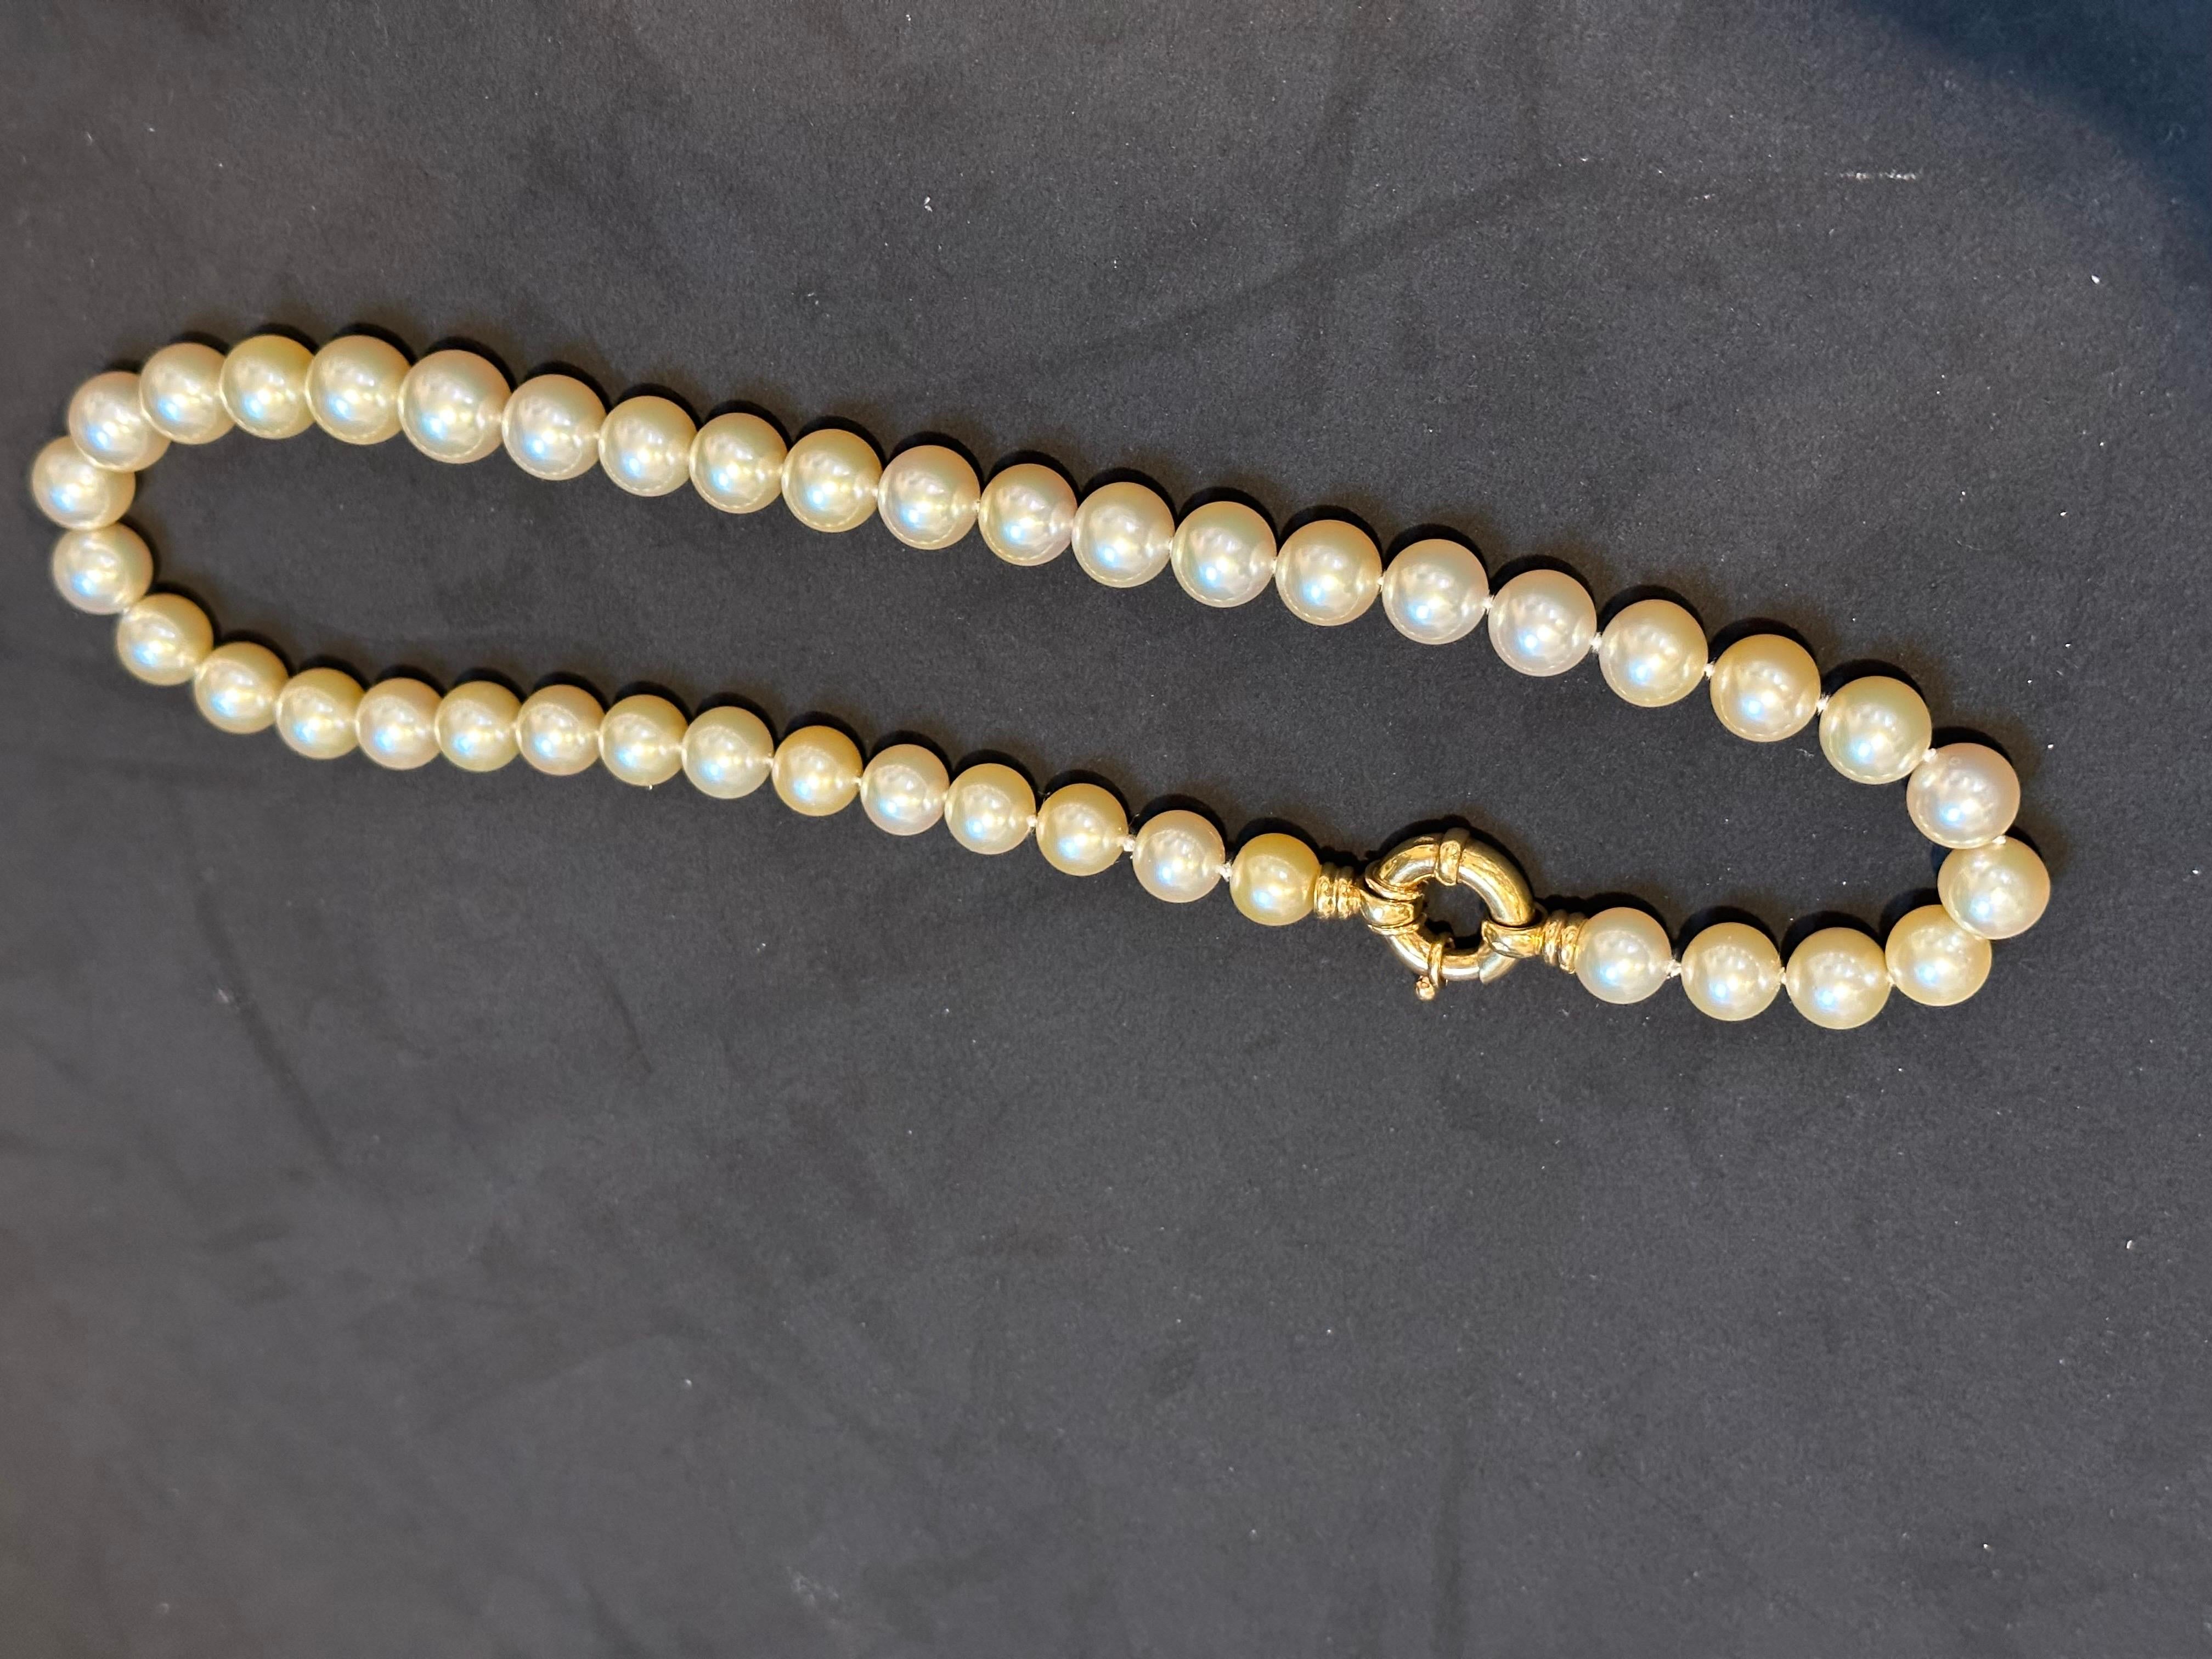 Golden South Sea Pearls 10-12 MM Strand Necklace 18 Kt Gold  Clasp 18